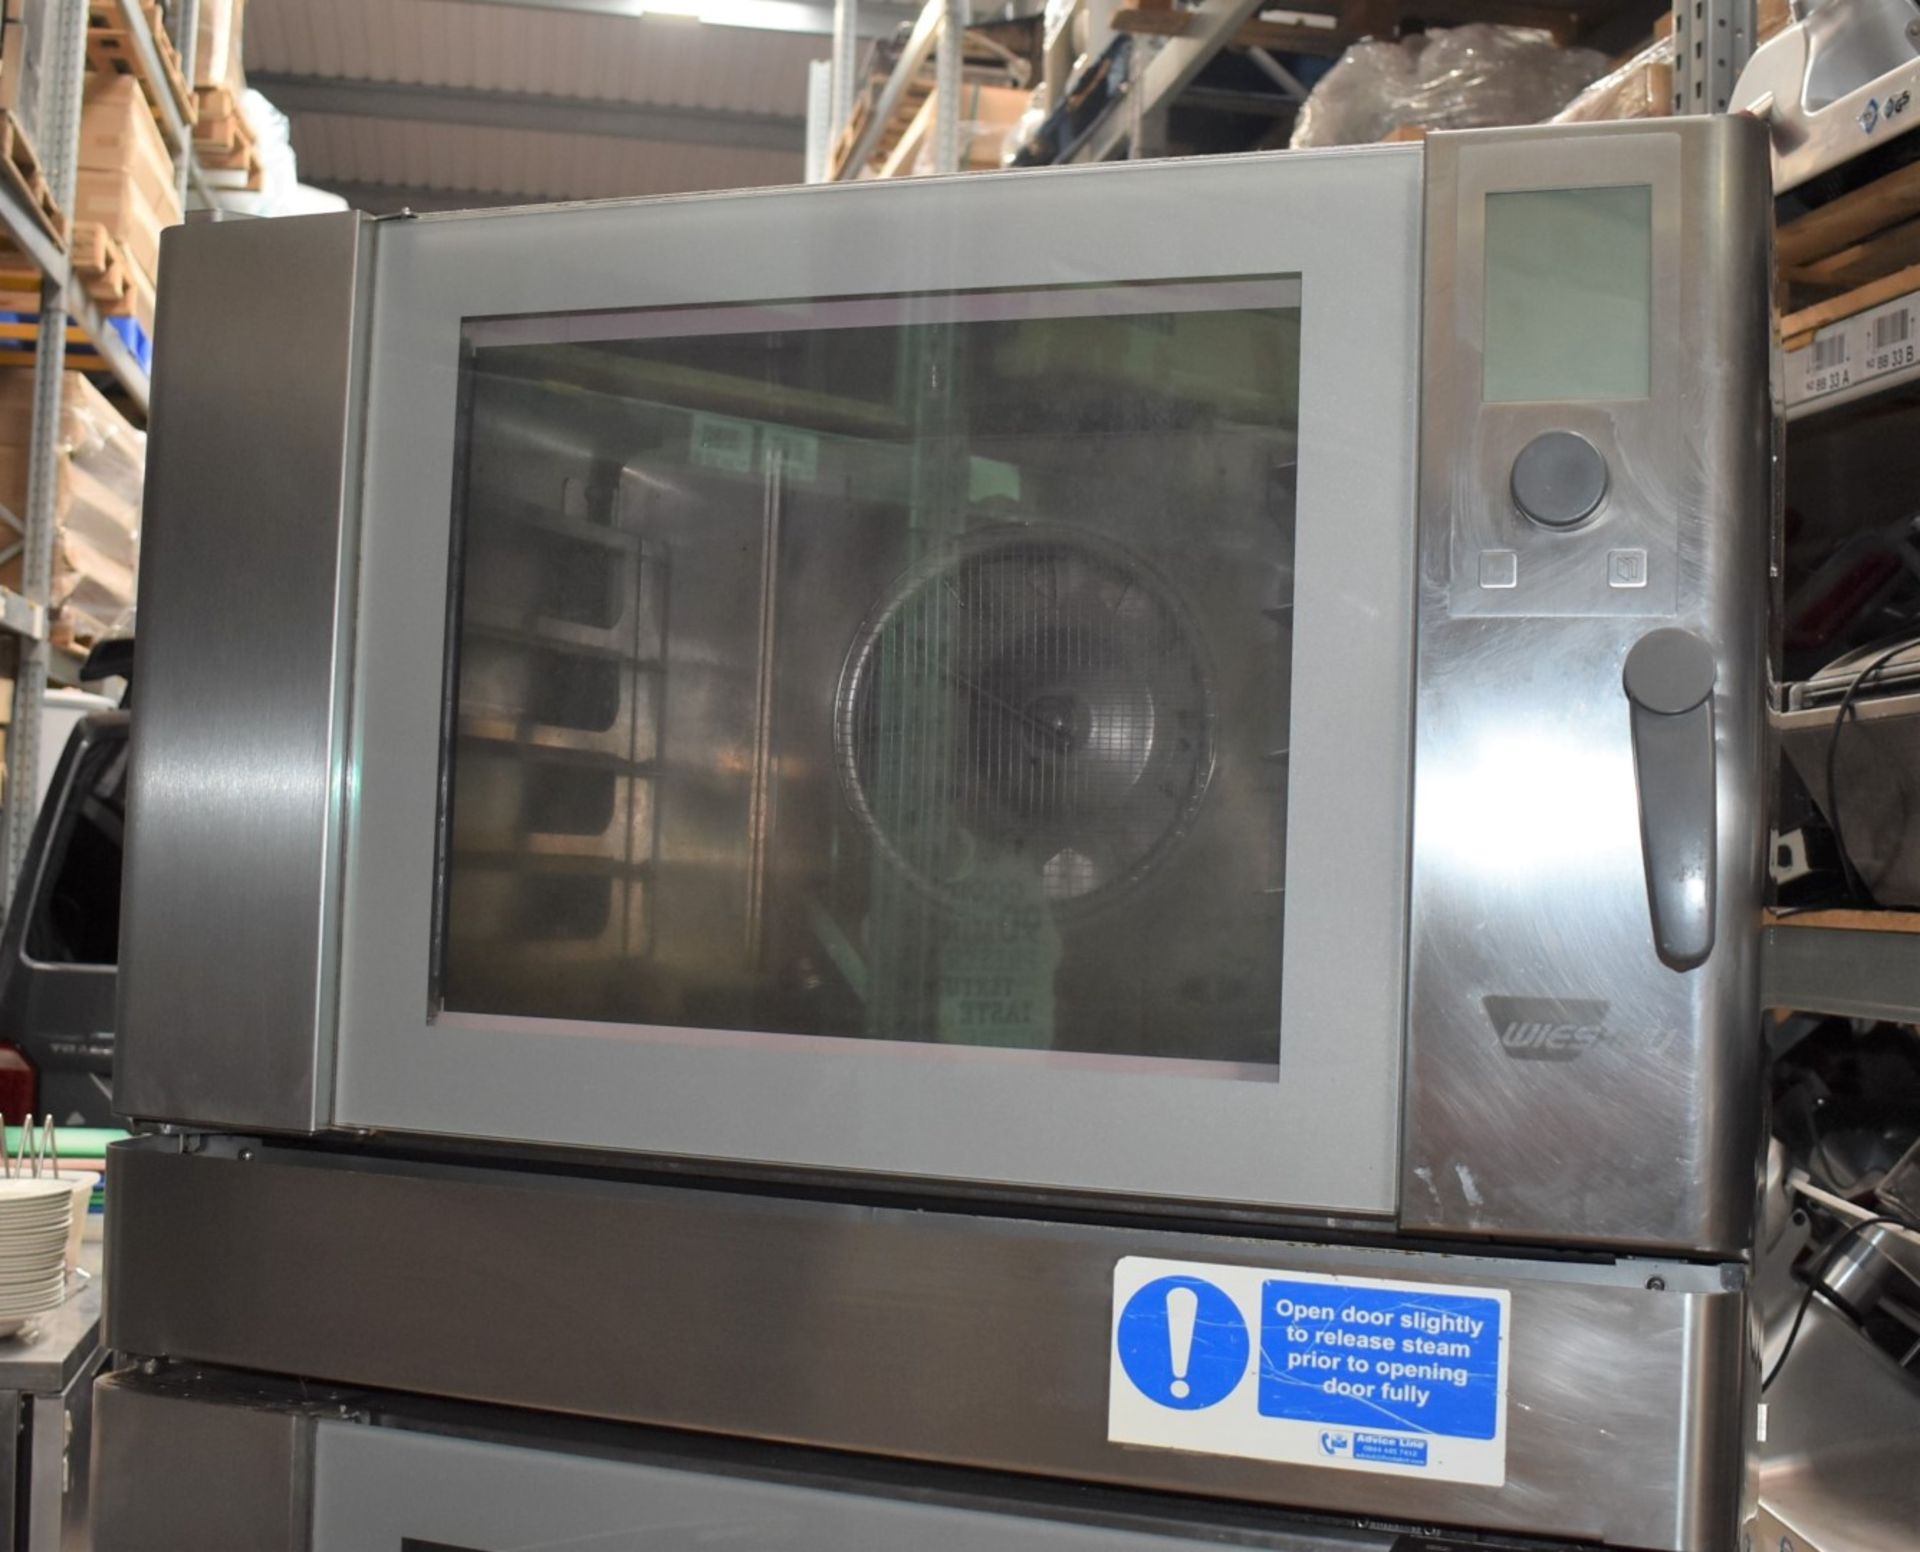 1 x Wiesheu B4-E2 Duo Commercial Convection Oven With Stainless Steel Exterior - Image 5 of 12